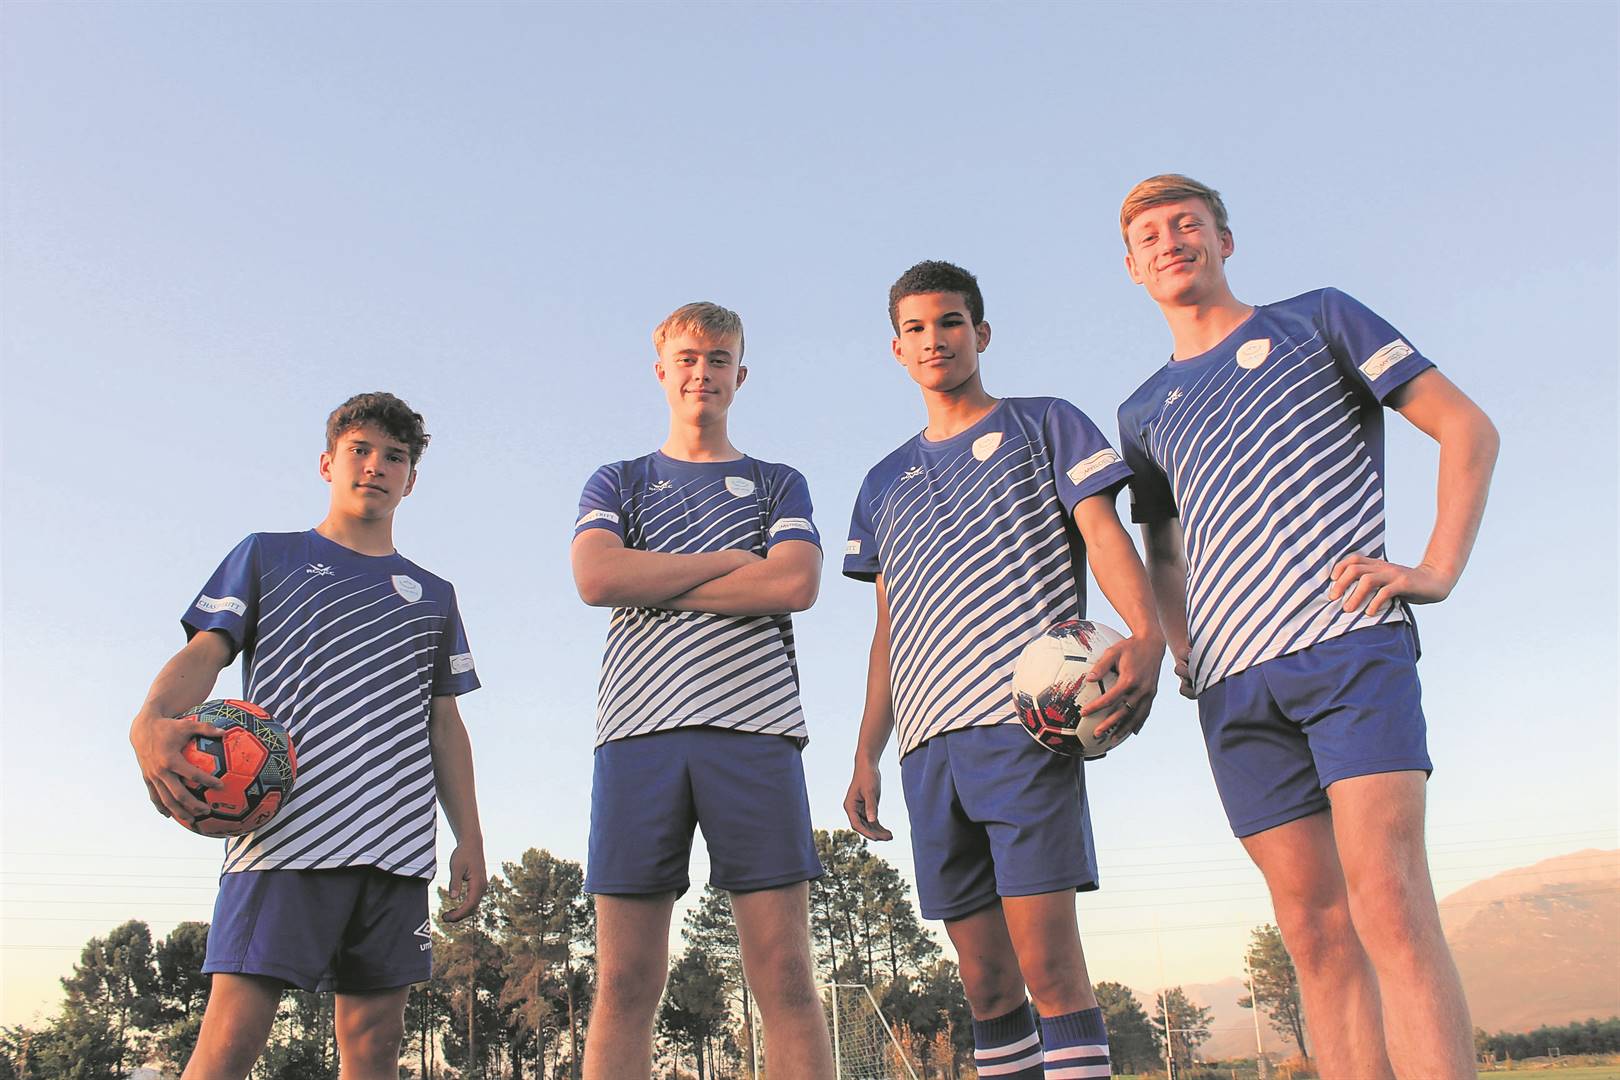 Four young men of Paarl have been chosen to take part in soccer trials which take place later this year in Spain. Harrison Warner (Bridge House Gr 11), Jack Wells (Bridge House Gr 11), Dillon Rudolph (HS Laborie Gr 12) and William Cumpsty (Paarl Boys’ High) will jet off to Madrid in Spain in an effort by soccer scouting agencies to identify talented football players and to provide these players with opportunities at professional footballs clubs both in Africa and abroad. These trials will serve as an opportunity for each player to showcase their talent in front of a wide range of top scouts, directors of football and coaches in the hope of signing a professional contract at their respective clubs. These for young soccer stars all play for the Paarl Rock Academy in Paarl under the coaching of Aidan Litchfield. Photo: Lise Beyers